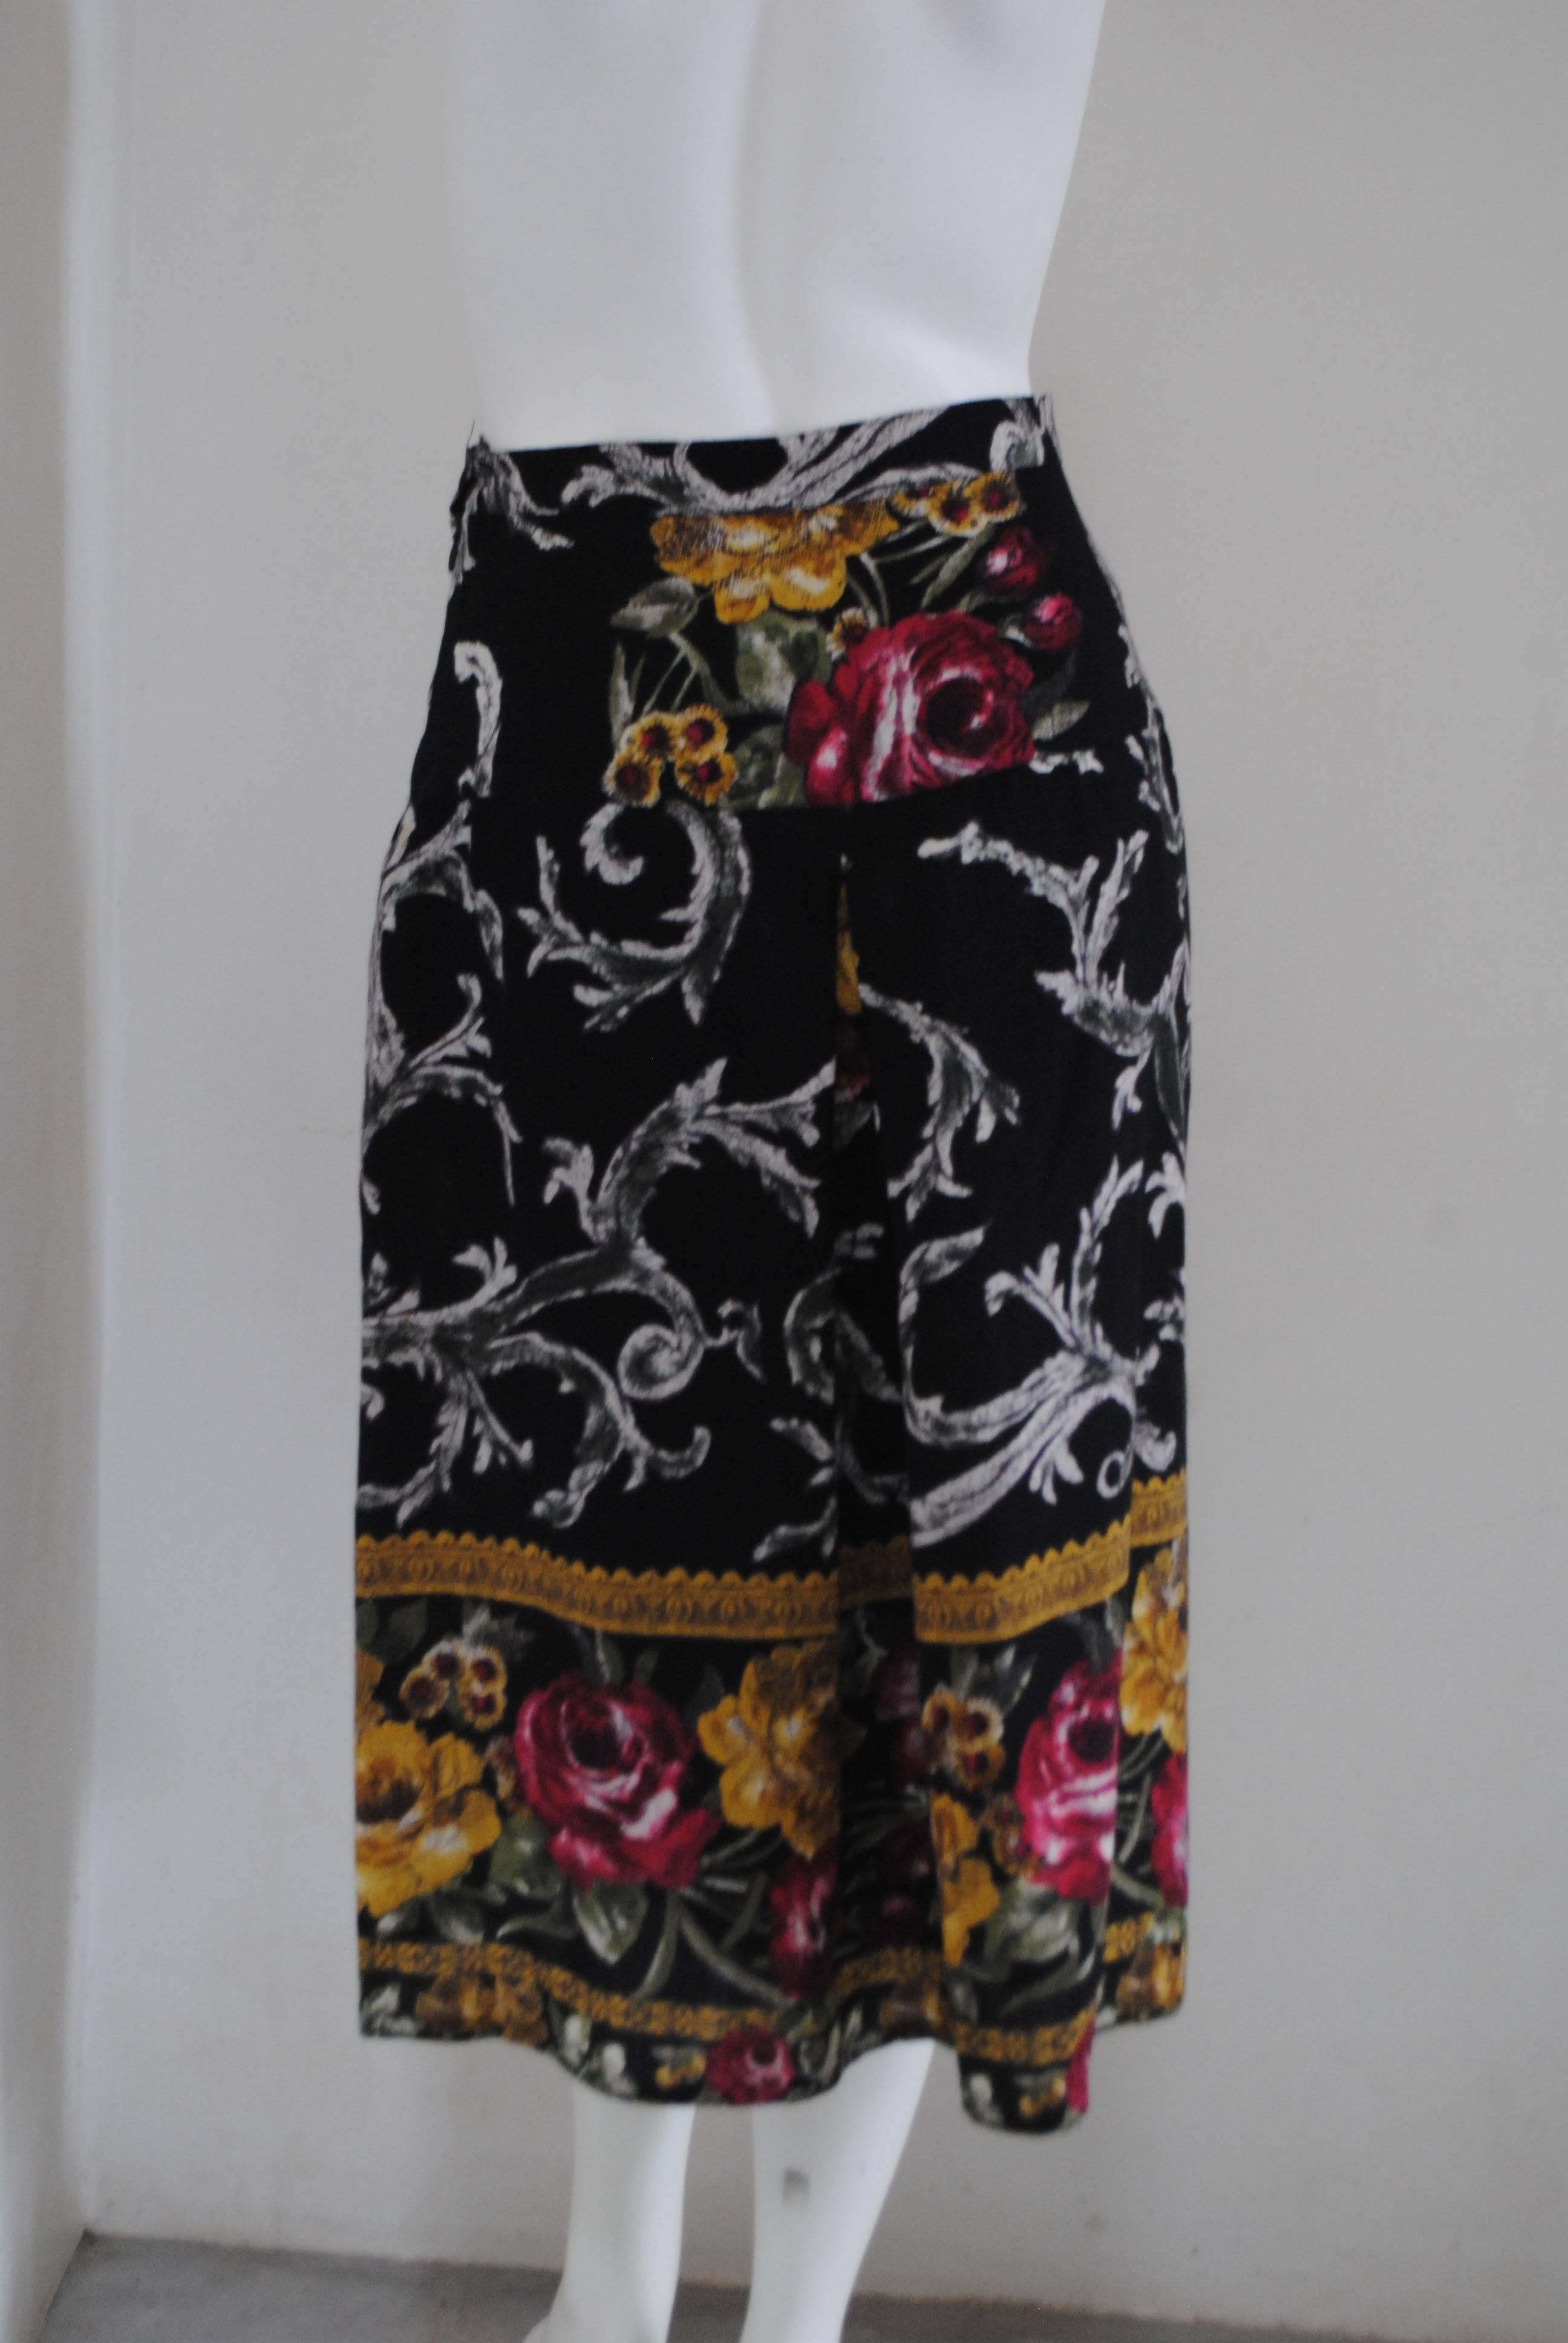 1980s Vintage Wool Flower Skirt

Totally made in italy in size S

Composition: Wool